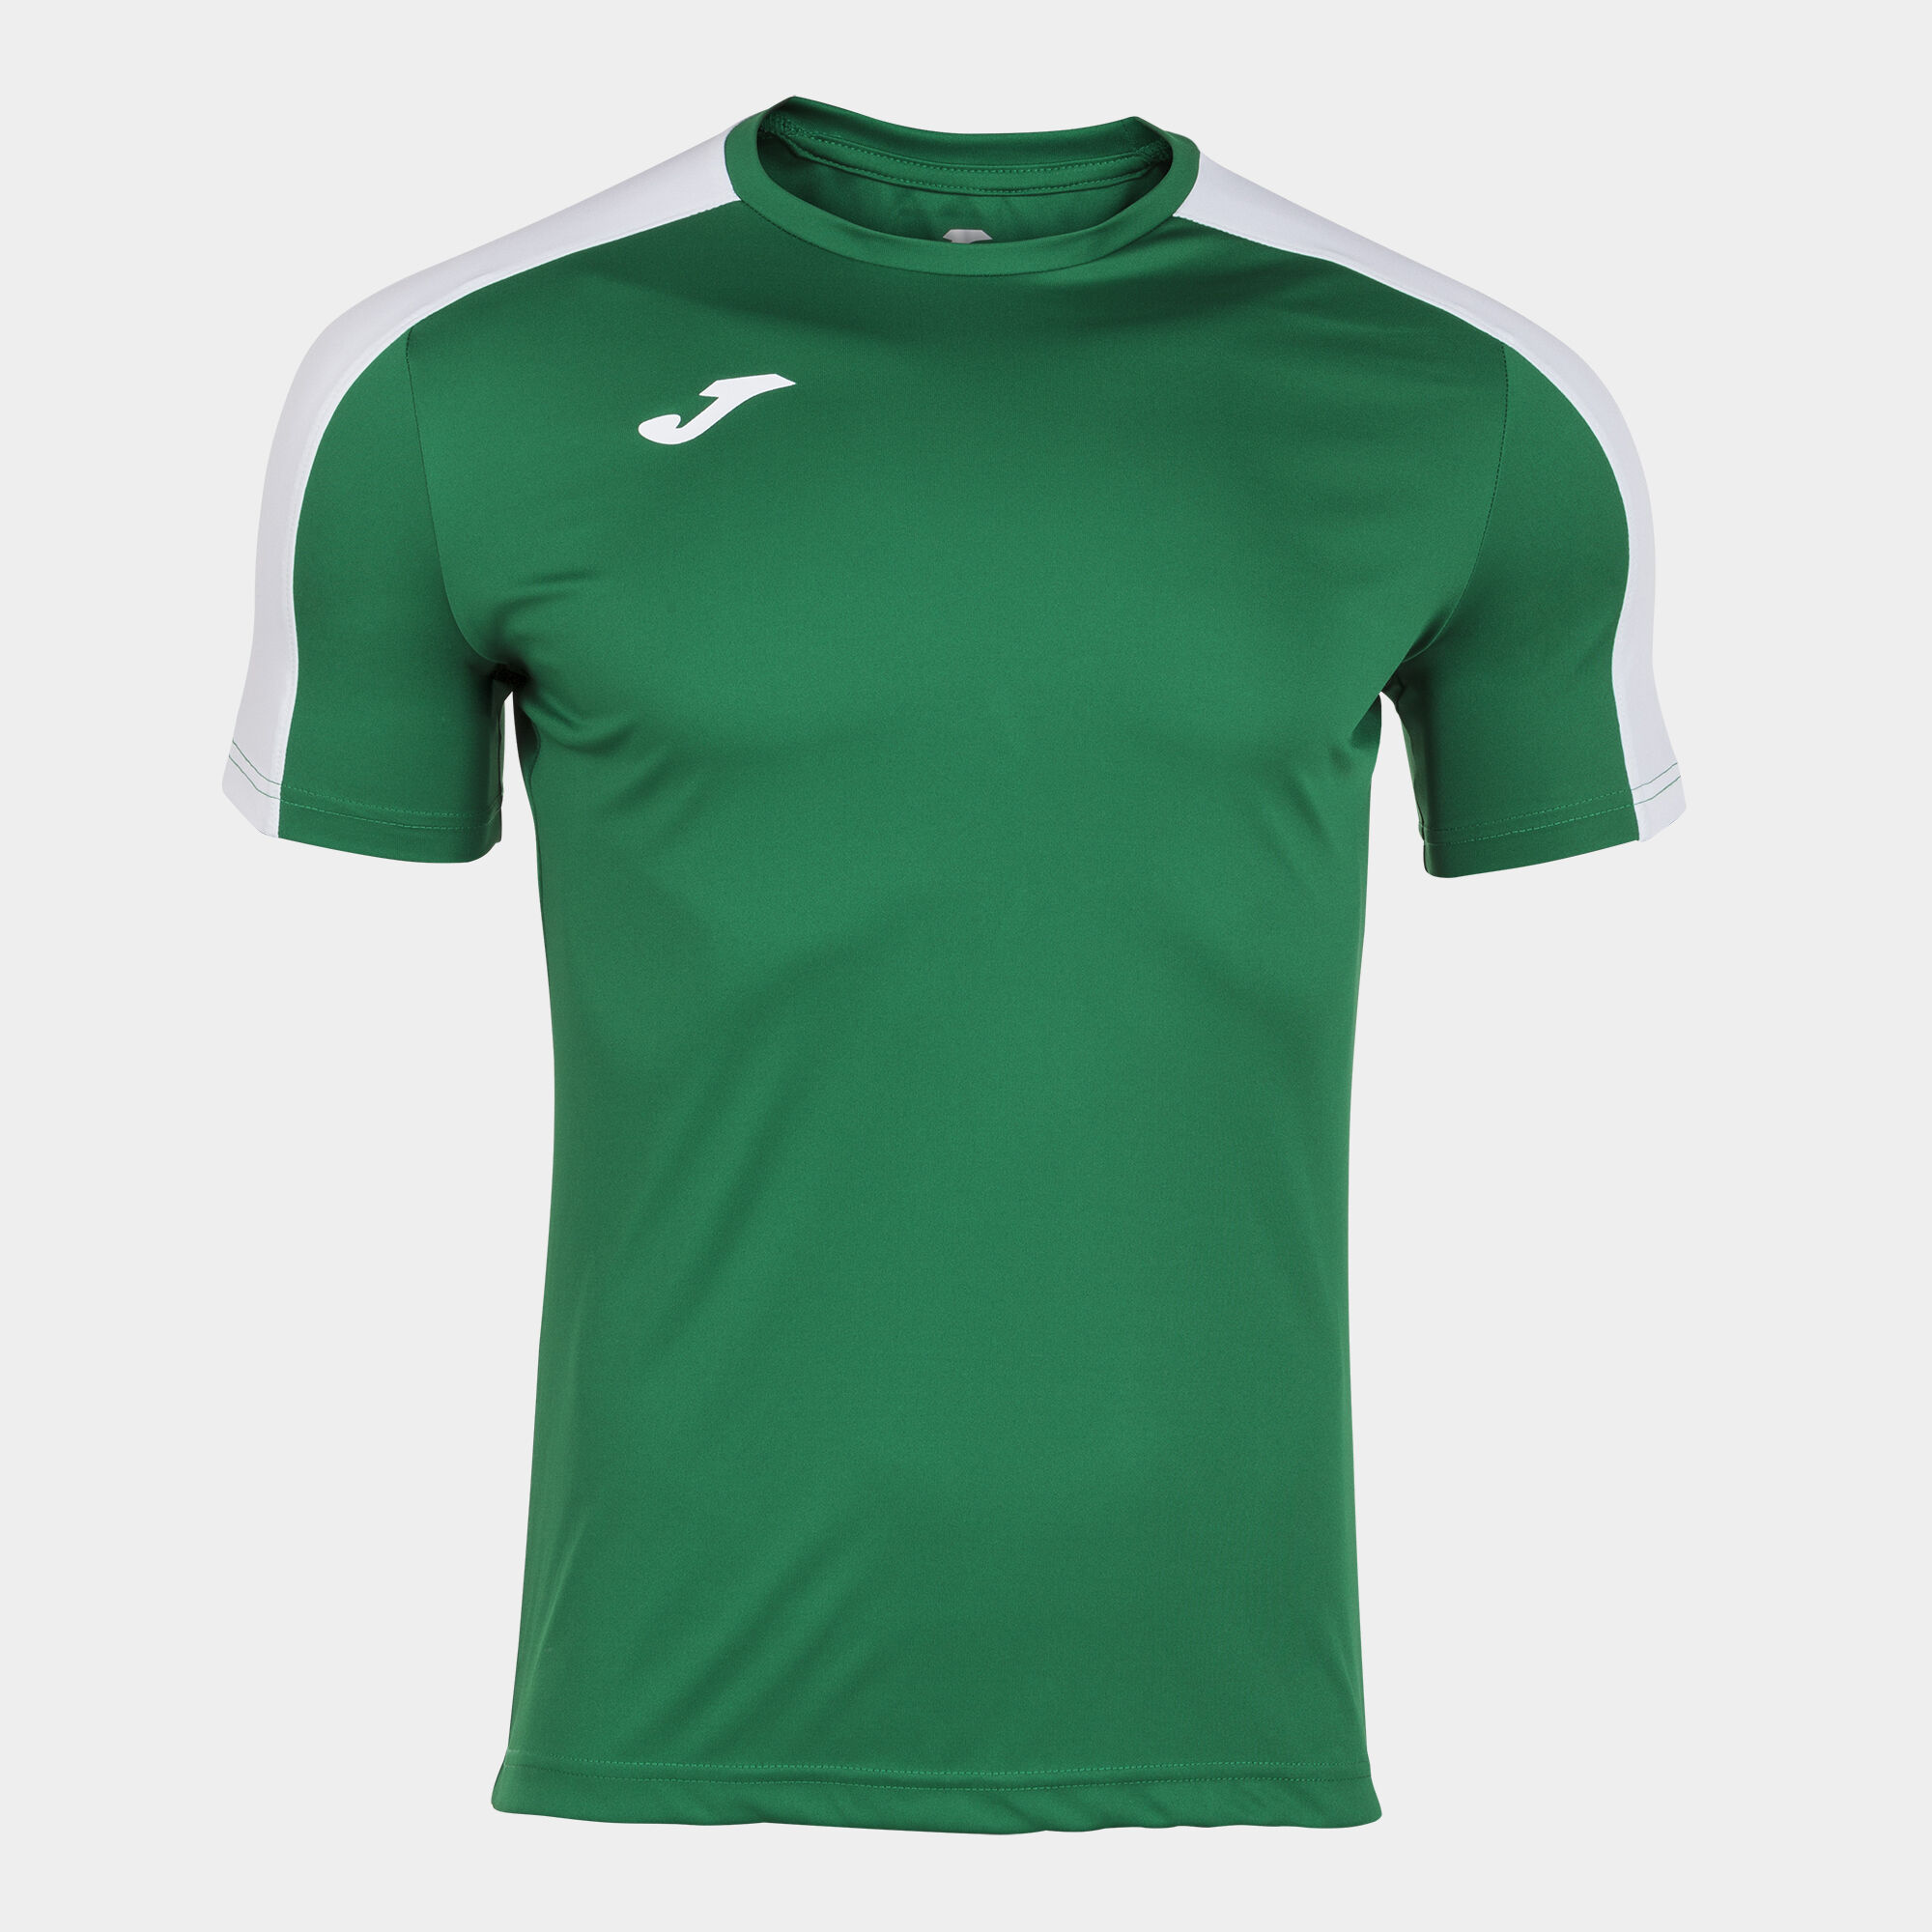 MAILLOT MANCHES COURTES HOMME ACADEMY III VERT BLANC